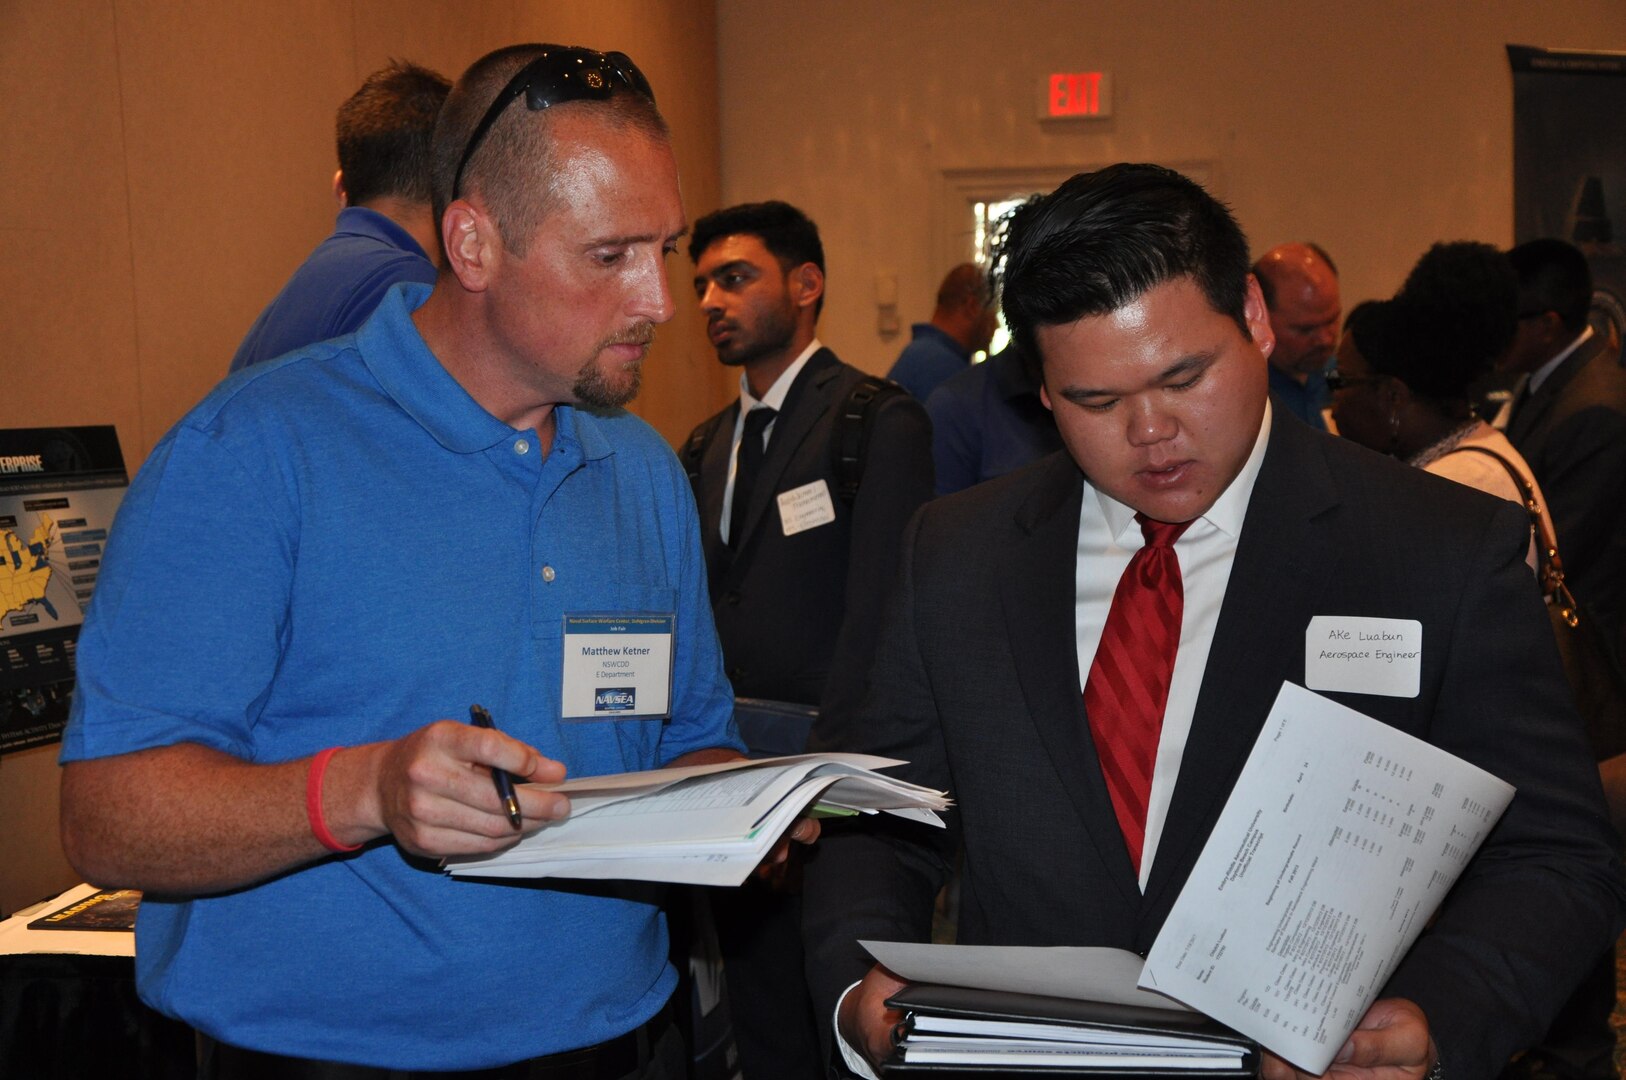 Image: Matthew Ketner - and employee of the Gun and Electric Systems Department at the Naval Surface Warfare Center Dahlgren Division (NSWCDD) - discusses career opportunities with a candidate at an NSWCDD job fair. The command's Human Resources Division announced Aug. 2 that it plans to make about 100 tentative job offers to candidates who attended the event. Approximately 325 candidates with bachelor's, master's, and doctoral degrees in biology, chemistry, computer science, engineering, mathematics, and physics spoke with senior Navy scientists, engineers, and managers about positions available for entry-level and experienced scientists and engineers.